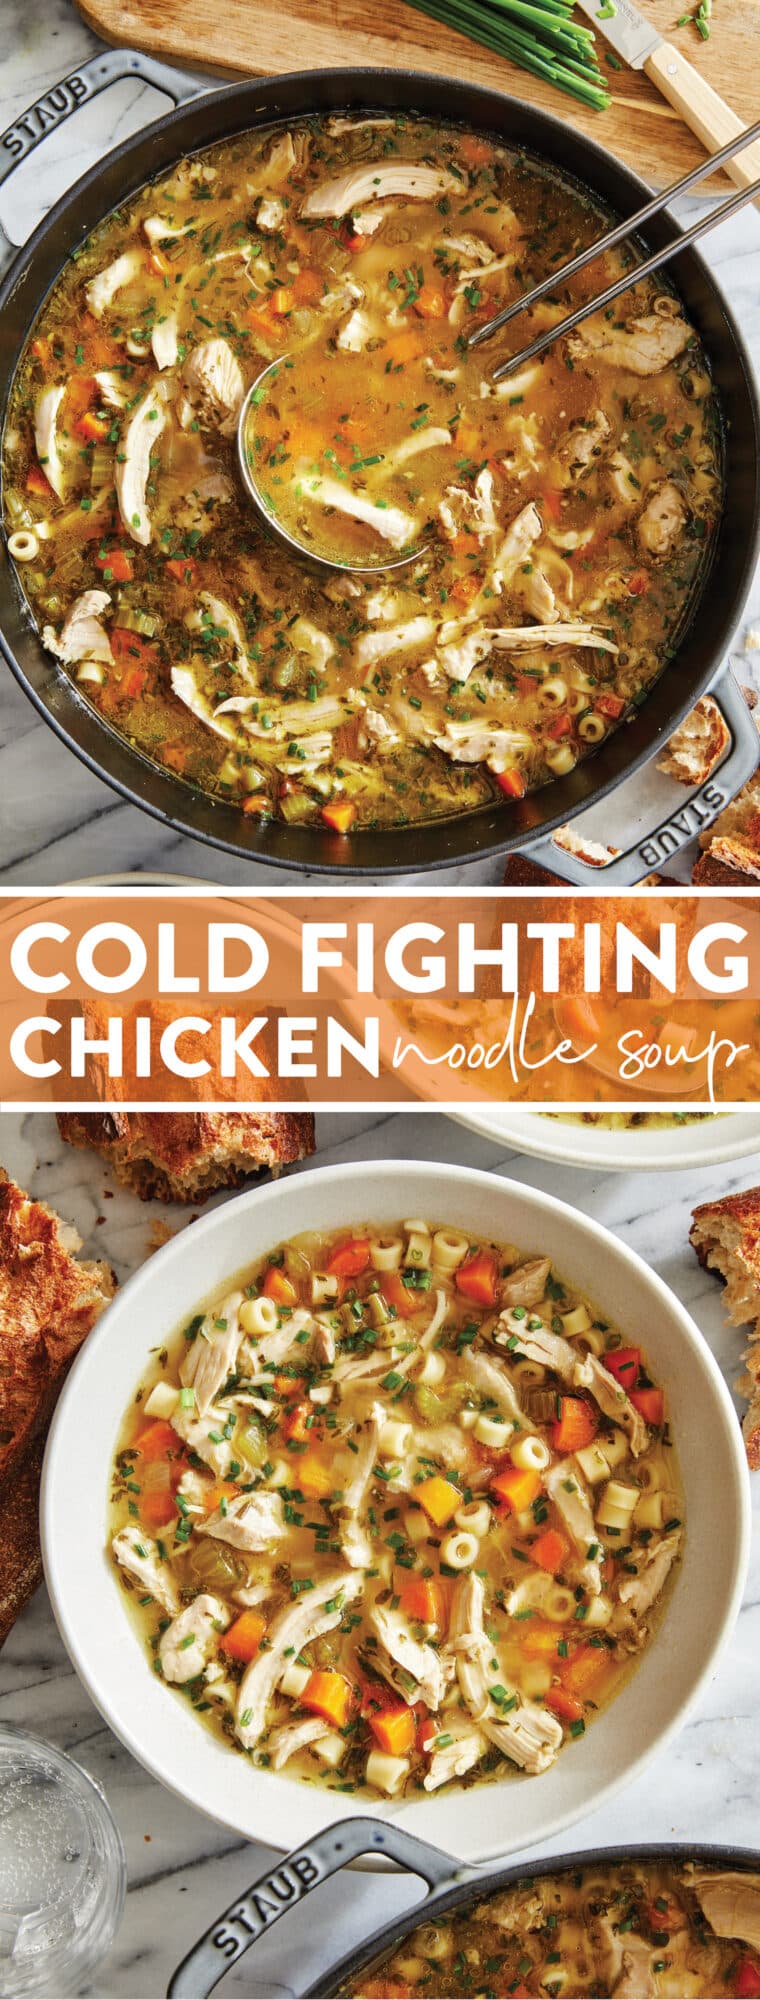 Cold Fighting Chicken Noodle Soup - The most soothing, comforting soup for flu season! So easy to make, you’ll be feeling better in no time!